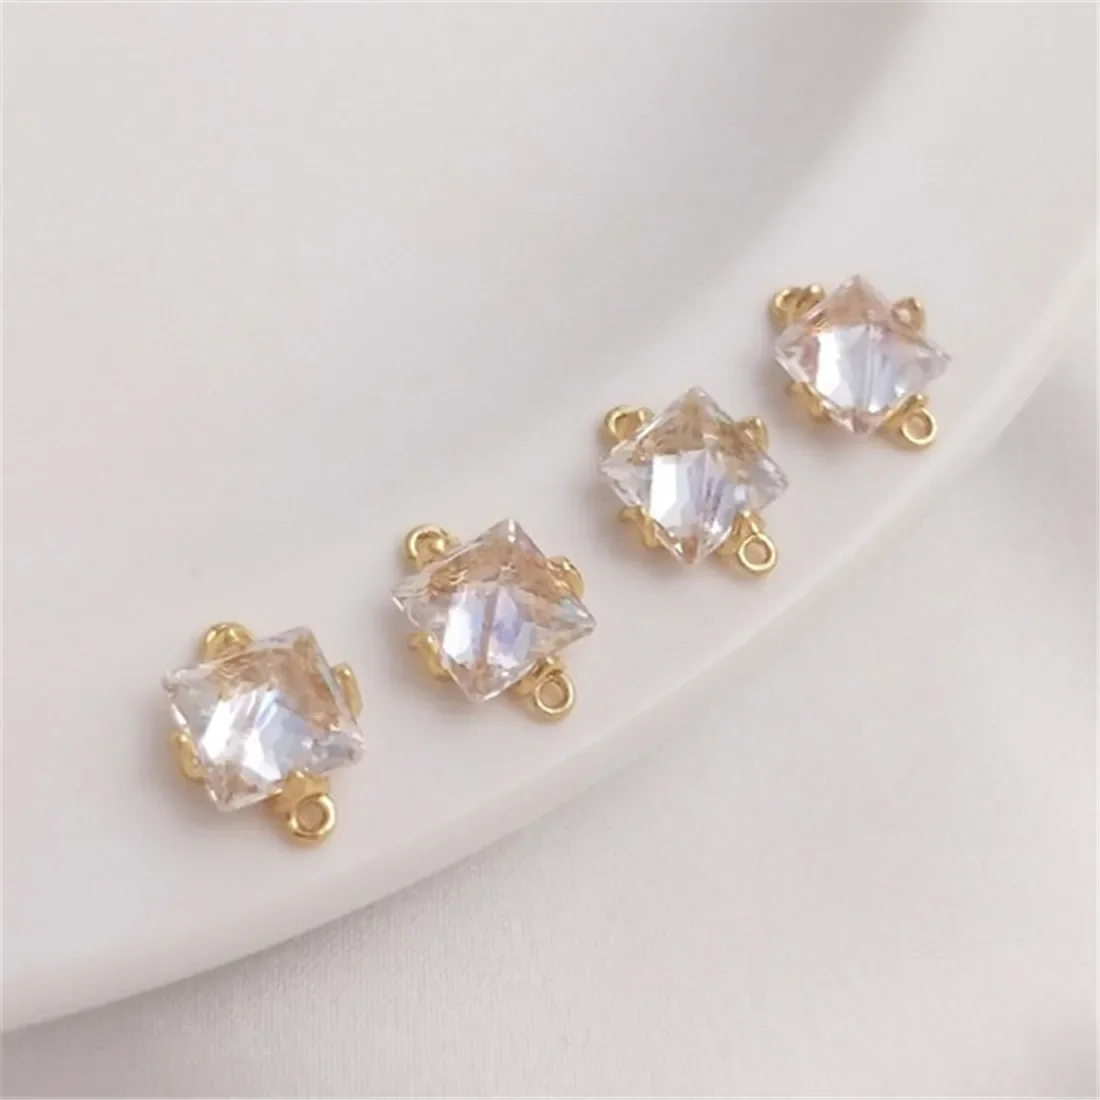 

14K Gold-filled Inlaid Square Zircon Double Hanging Accessories DIY Handmade Jewelry Material Bracelet Earrings Connector C264